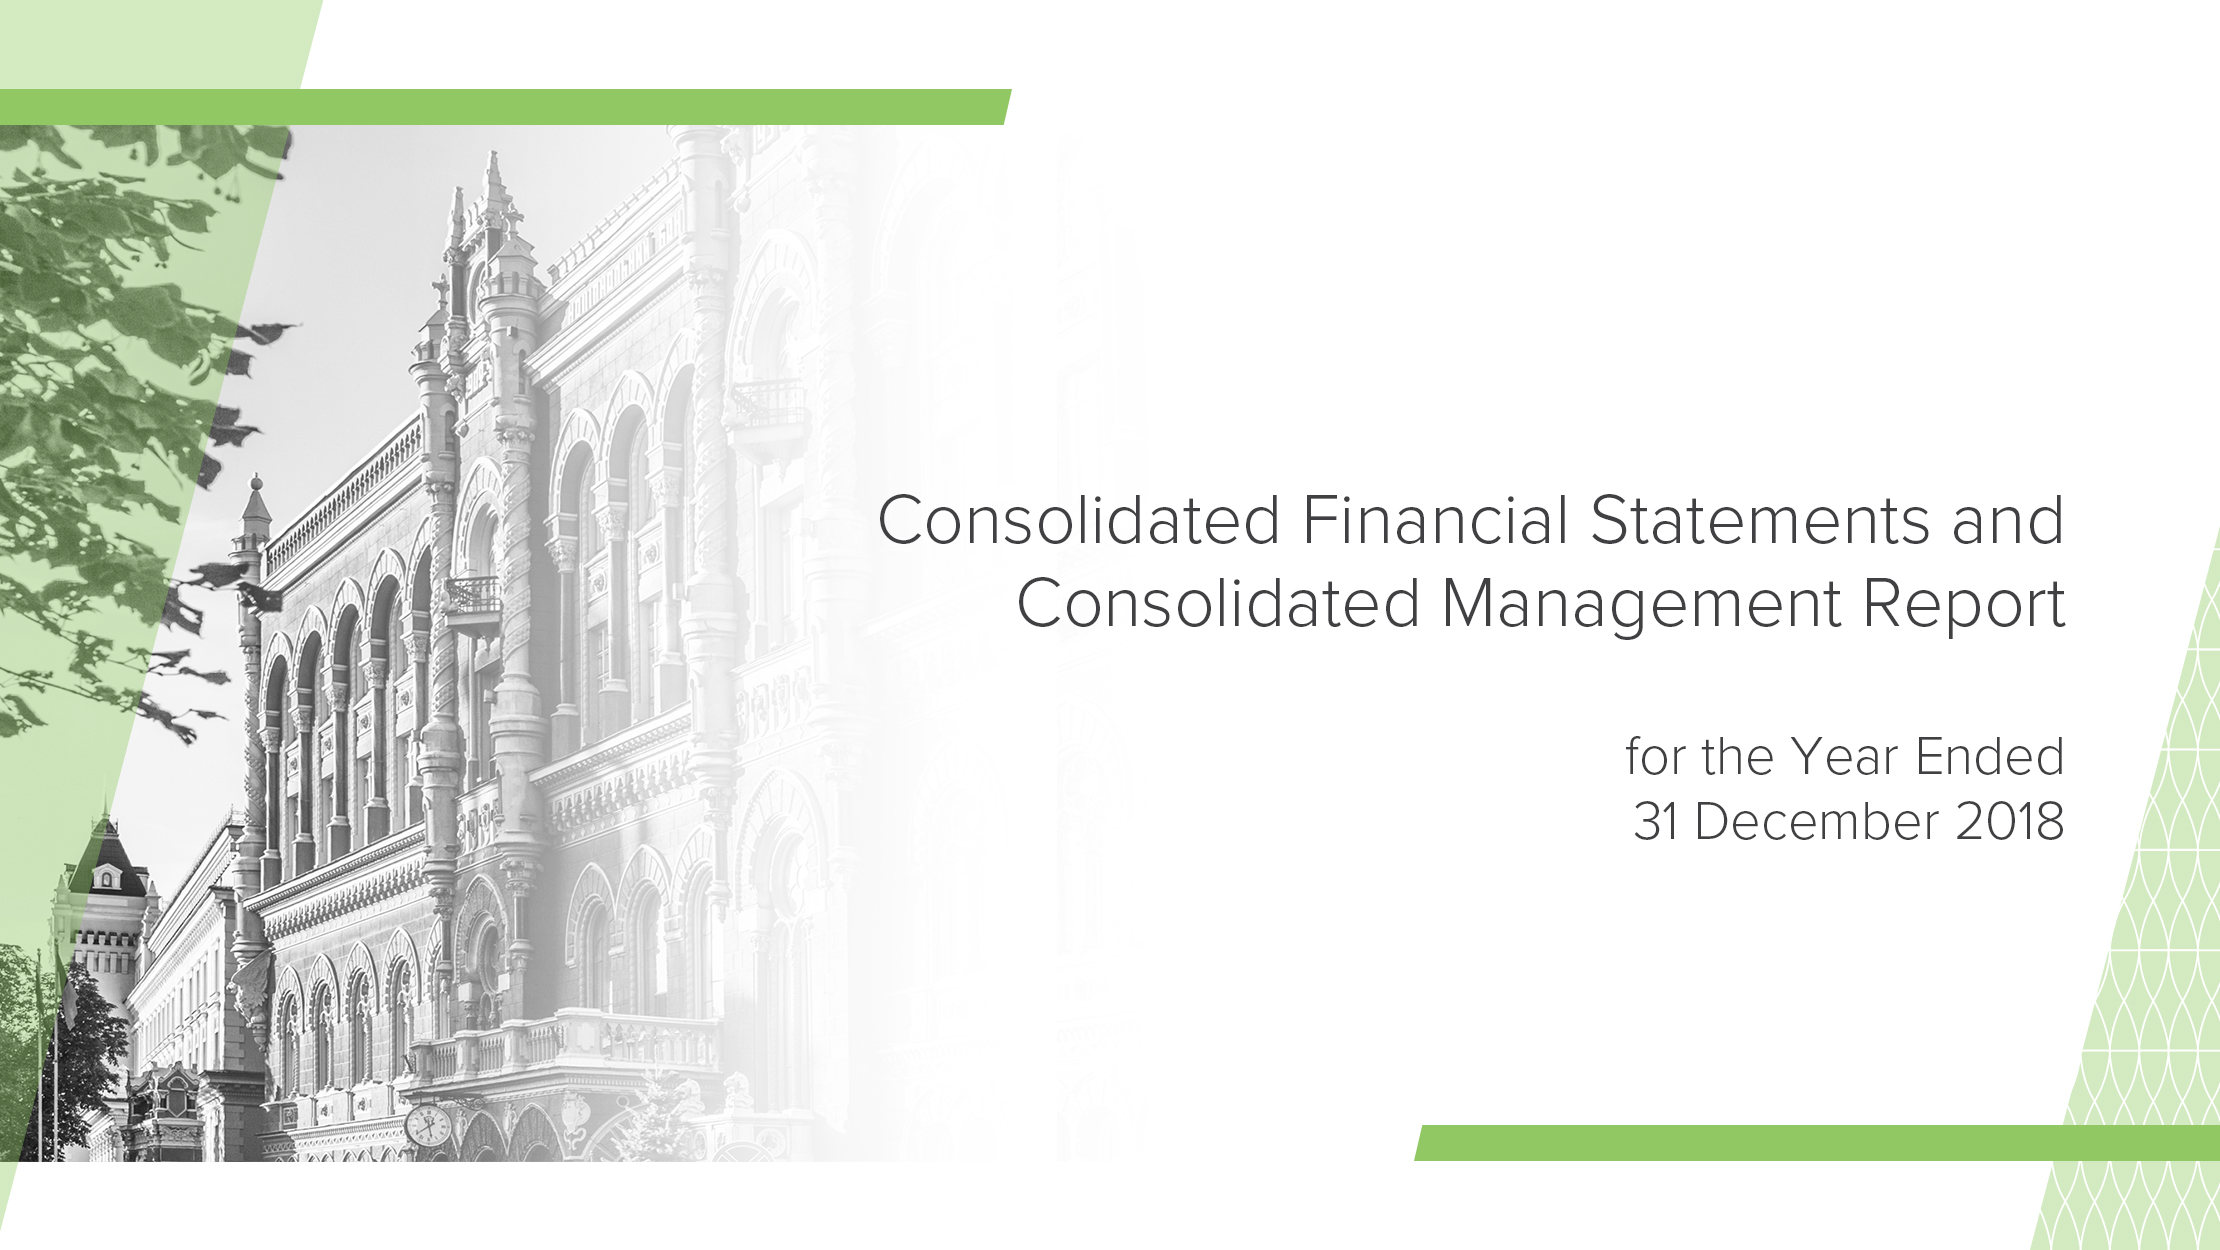 Consolidated Financial Statements Consolidated Management Report for the Year Ended 31 December 2018